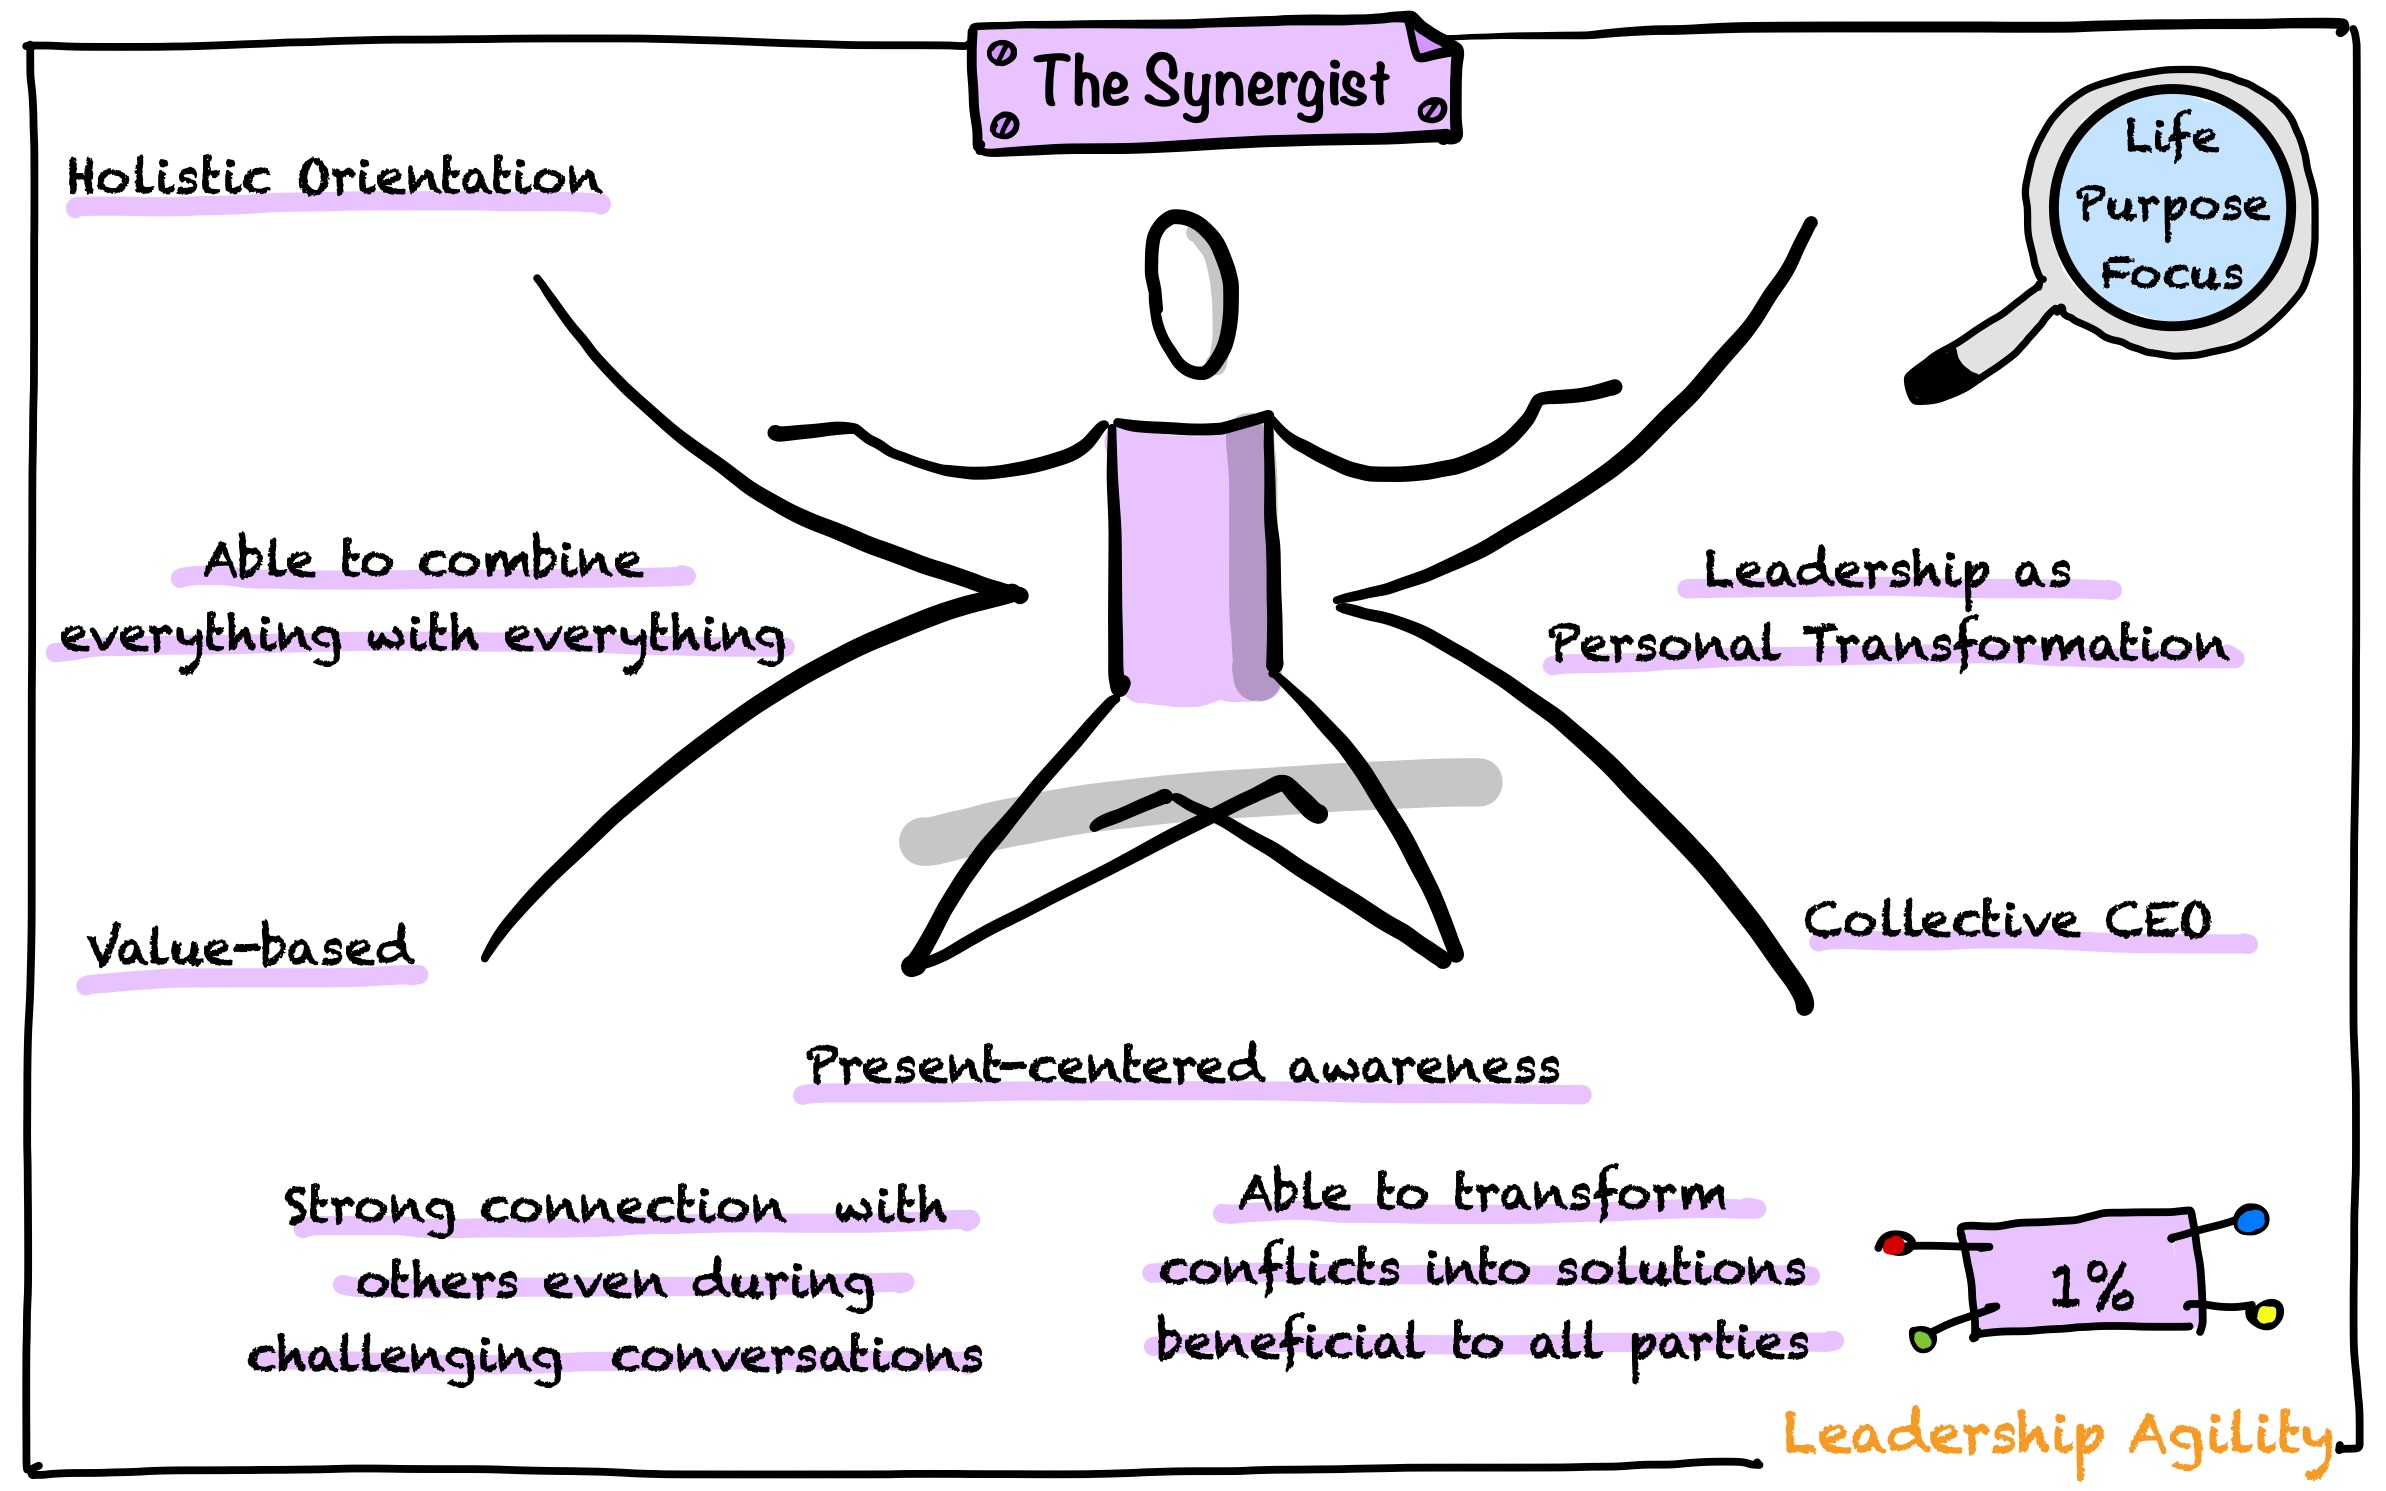 The Five Levels of Leadership Agility in Pictures